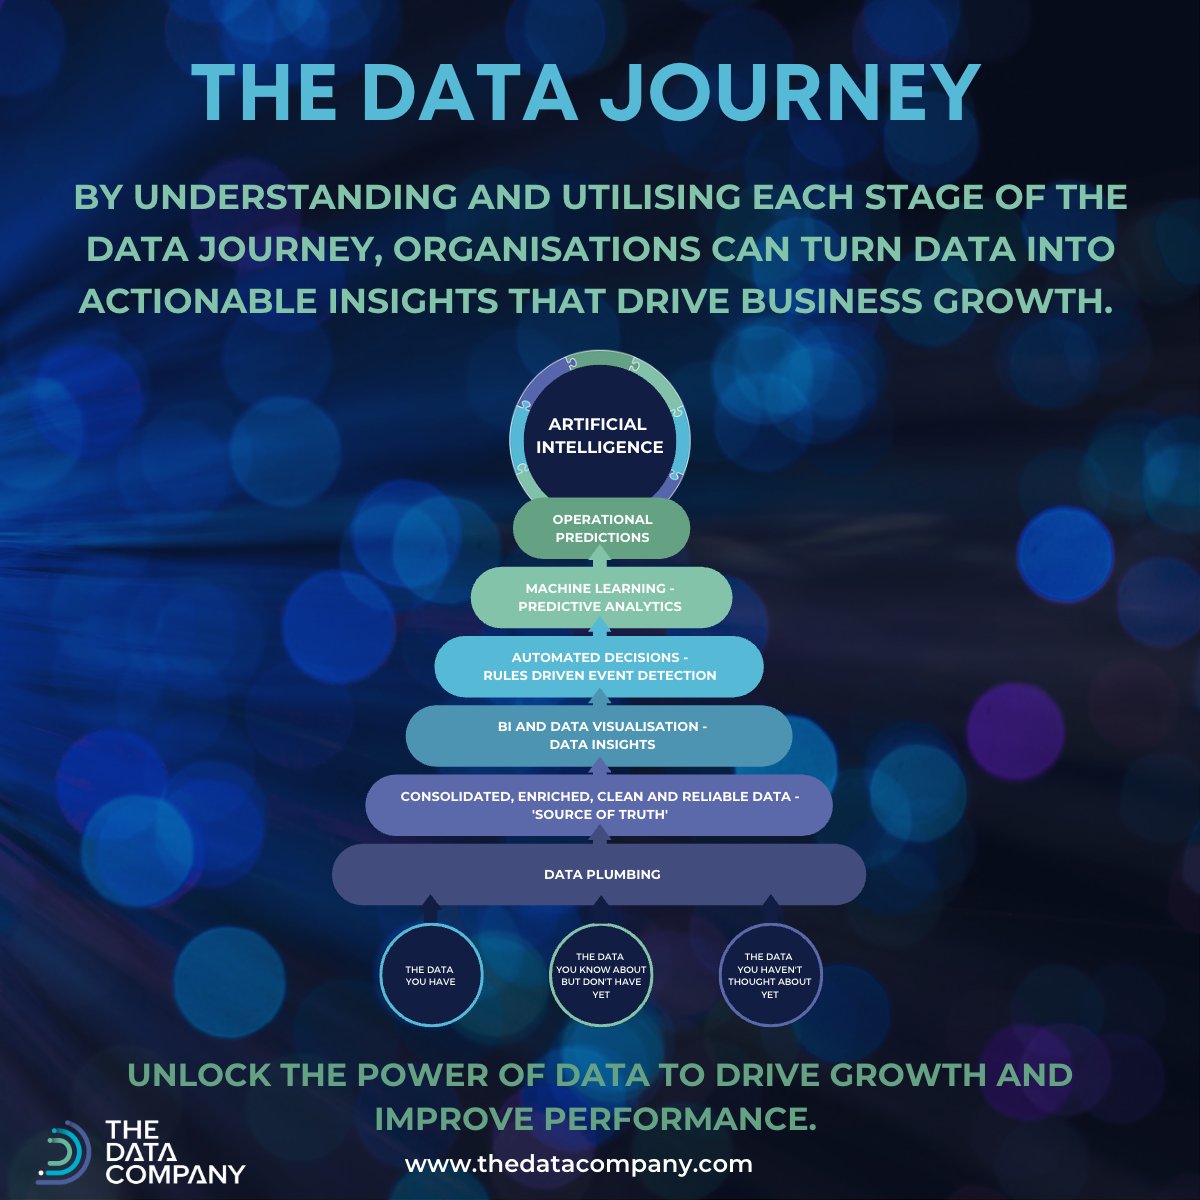 UNLOCK THE FULL POTENTIAL OF YOUR DATA WITH A SUCCESSFUL DATA JOURNEY. 

Join the data-driven revolution today! 

#DataJourney #BusinessInsights #PerformanceImprovement #DataSurgery #MachineLearning #PredictiveAnalytics